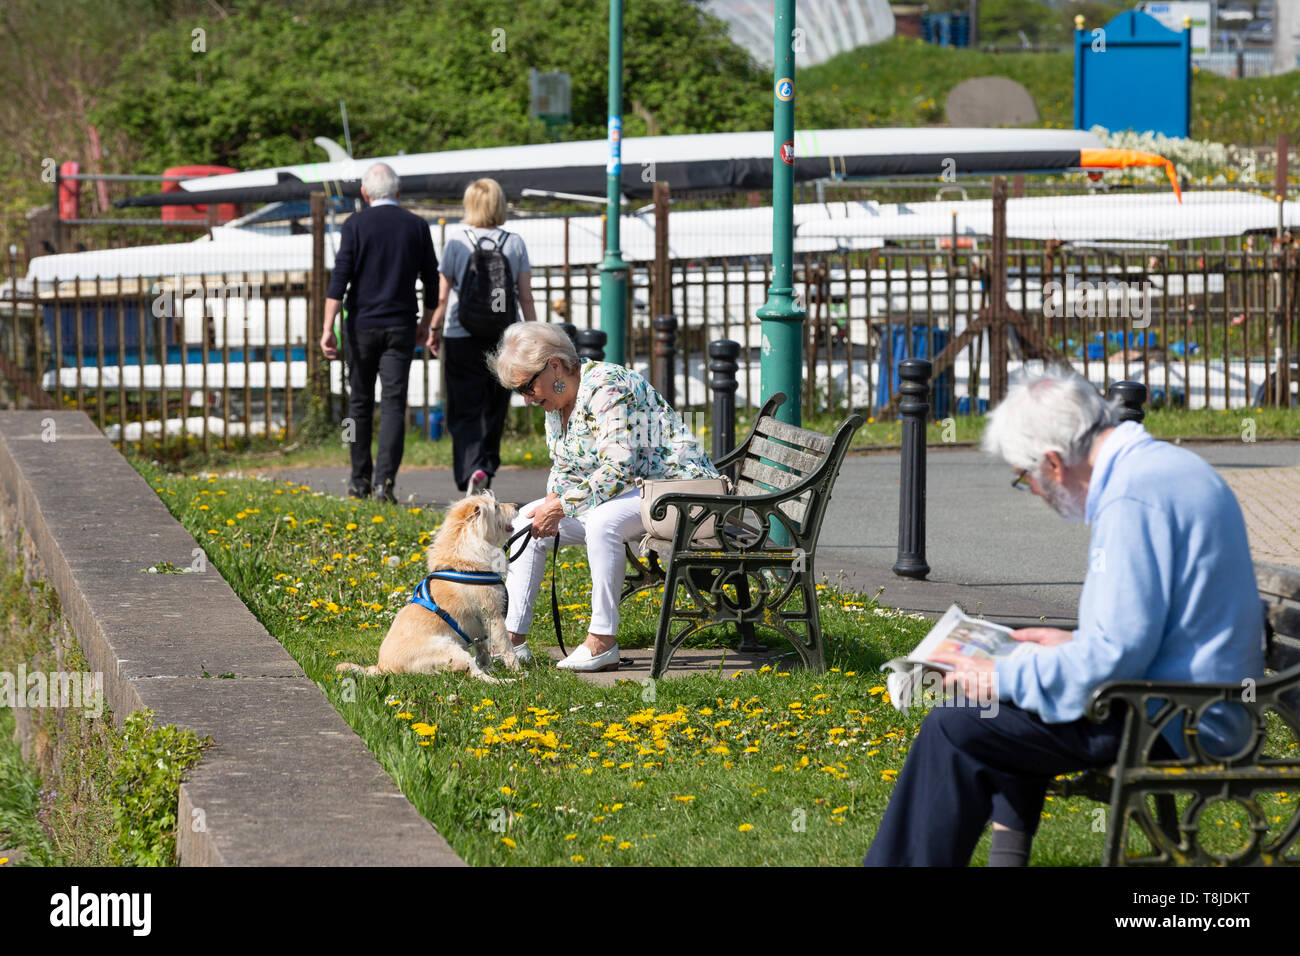 Senior men and women enjoying leisure time on a bright, sunny morning - couple walking, man reading newspaper, woman with dog Stock Photo